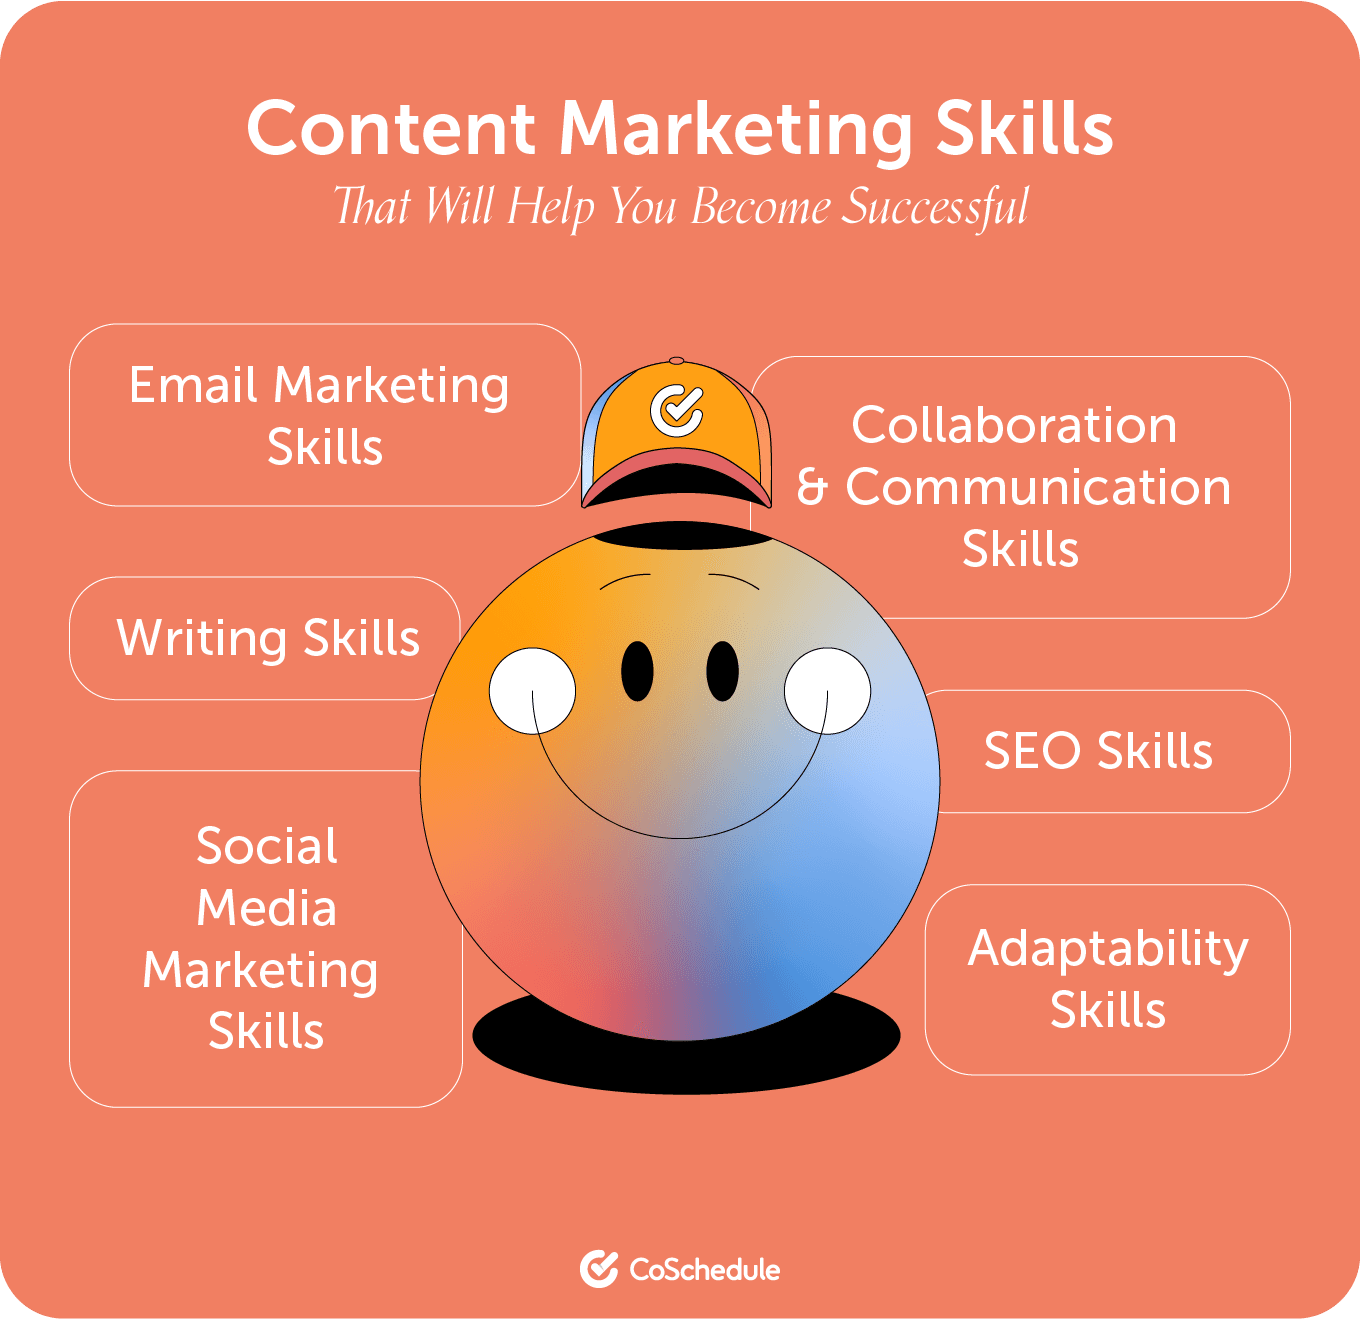 CoSchedule shows that skills like writing, SEO, adaptability, email marketing, communication, and social media marketing will help you be successful in content marketing. 